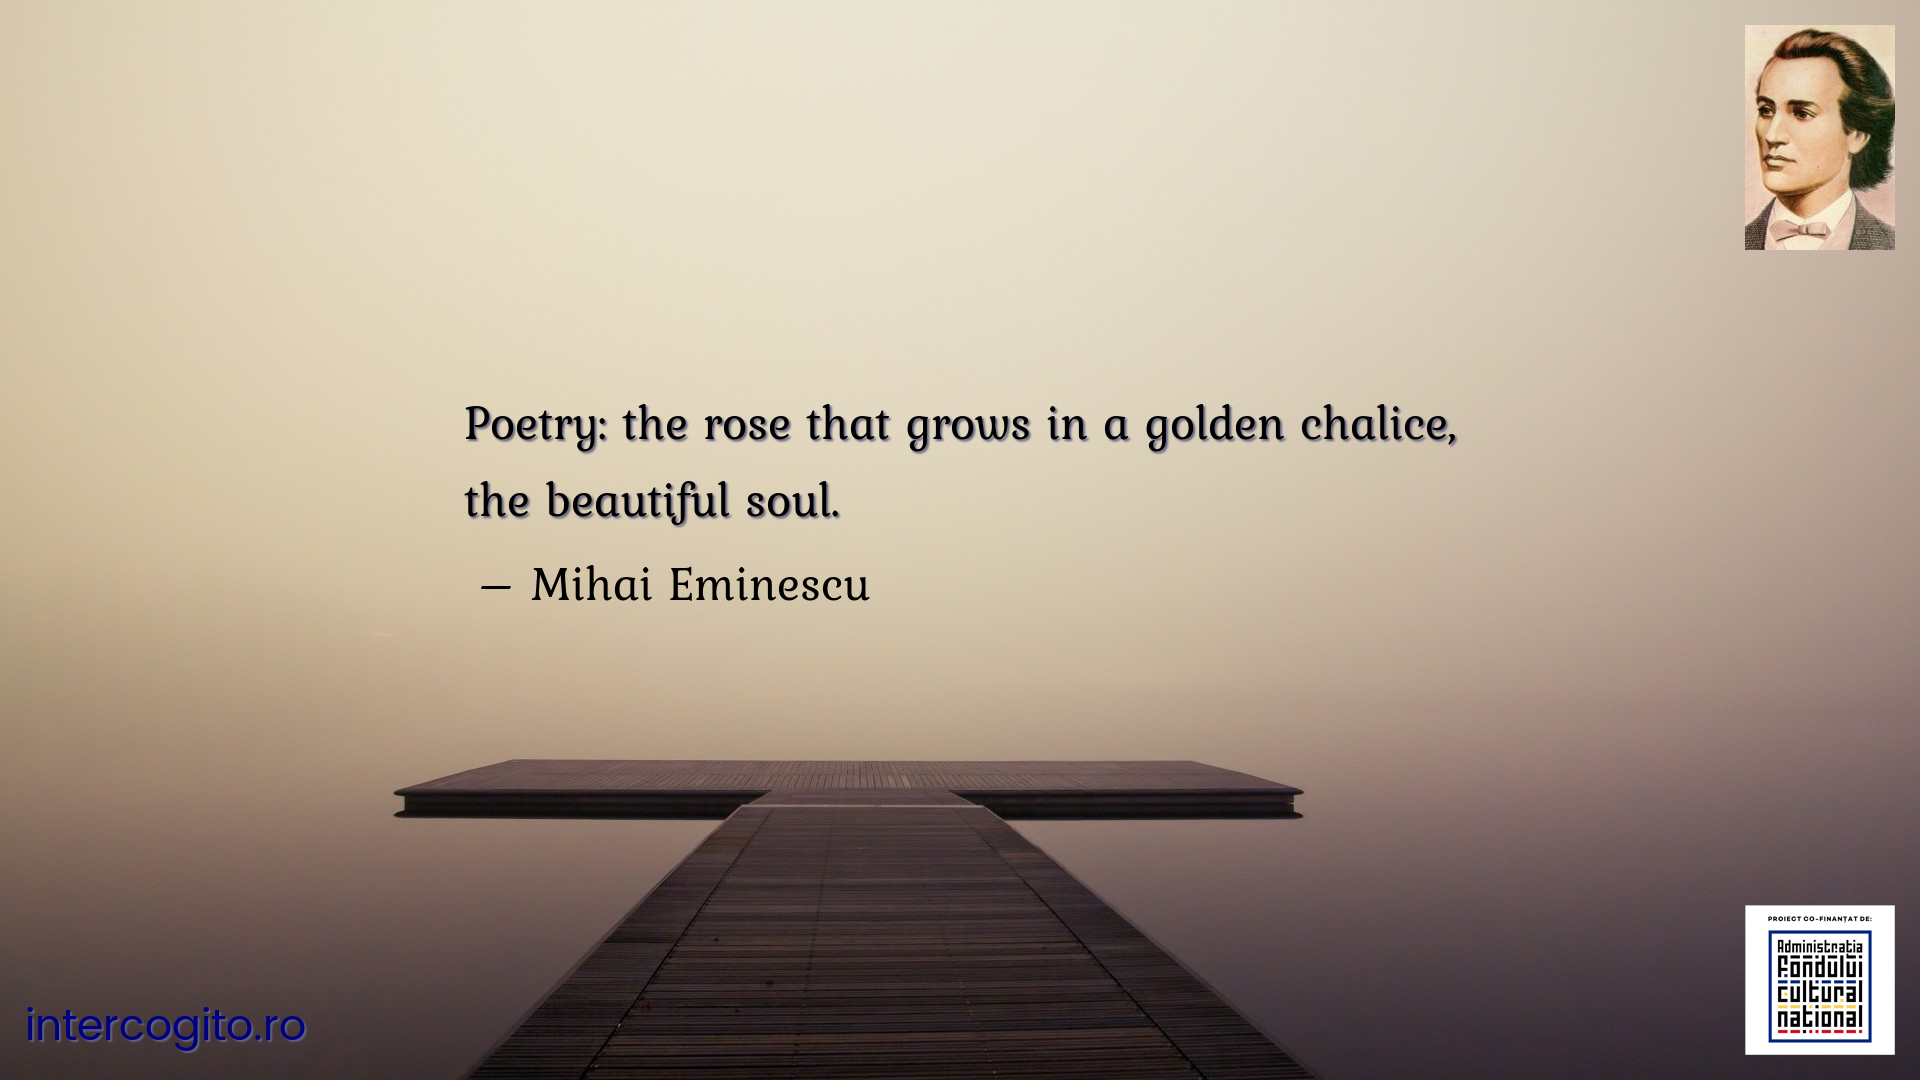 Poetry: the rose that grows in a golden chalice, the beautiful soul.